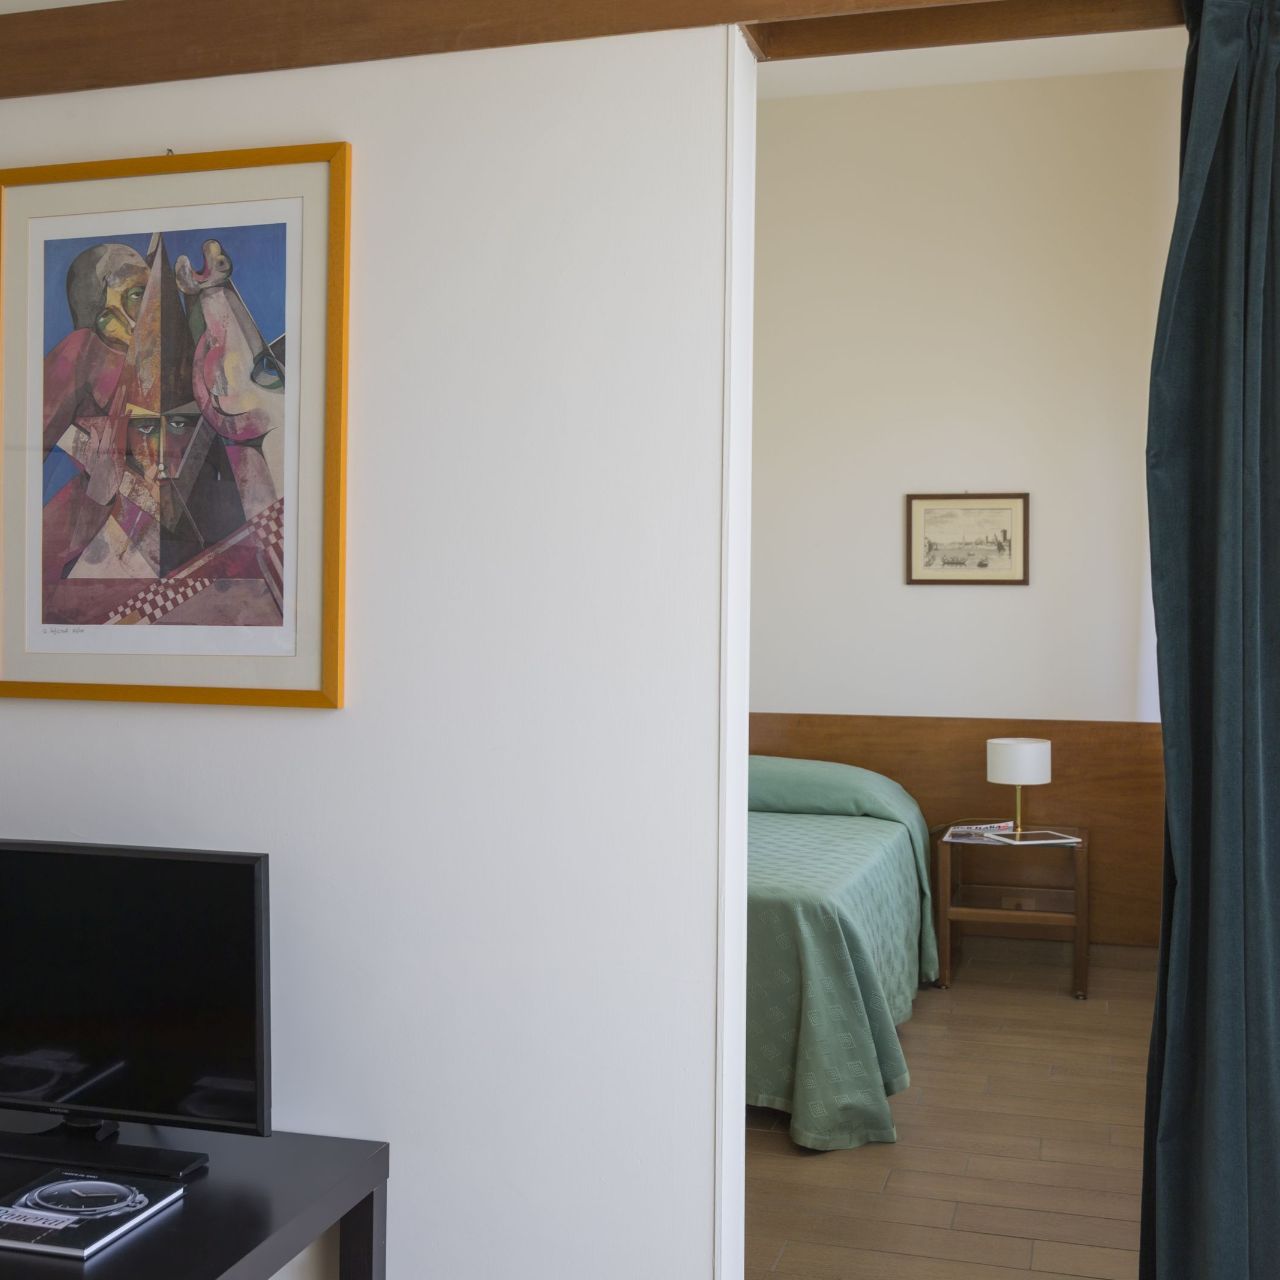 Hotel Residence Porta al Prato - Florence - Great prices at HOTEL INFO